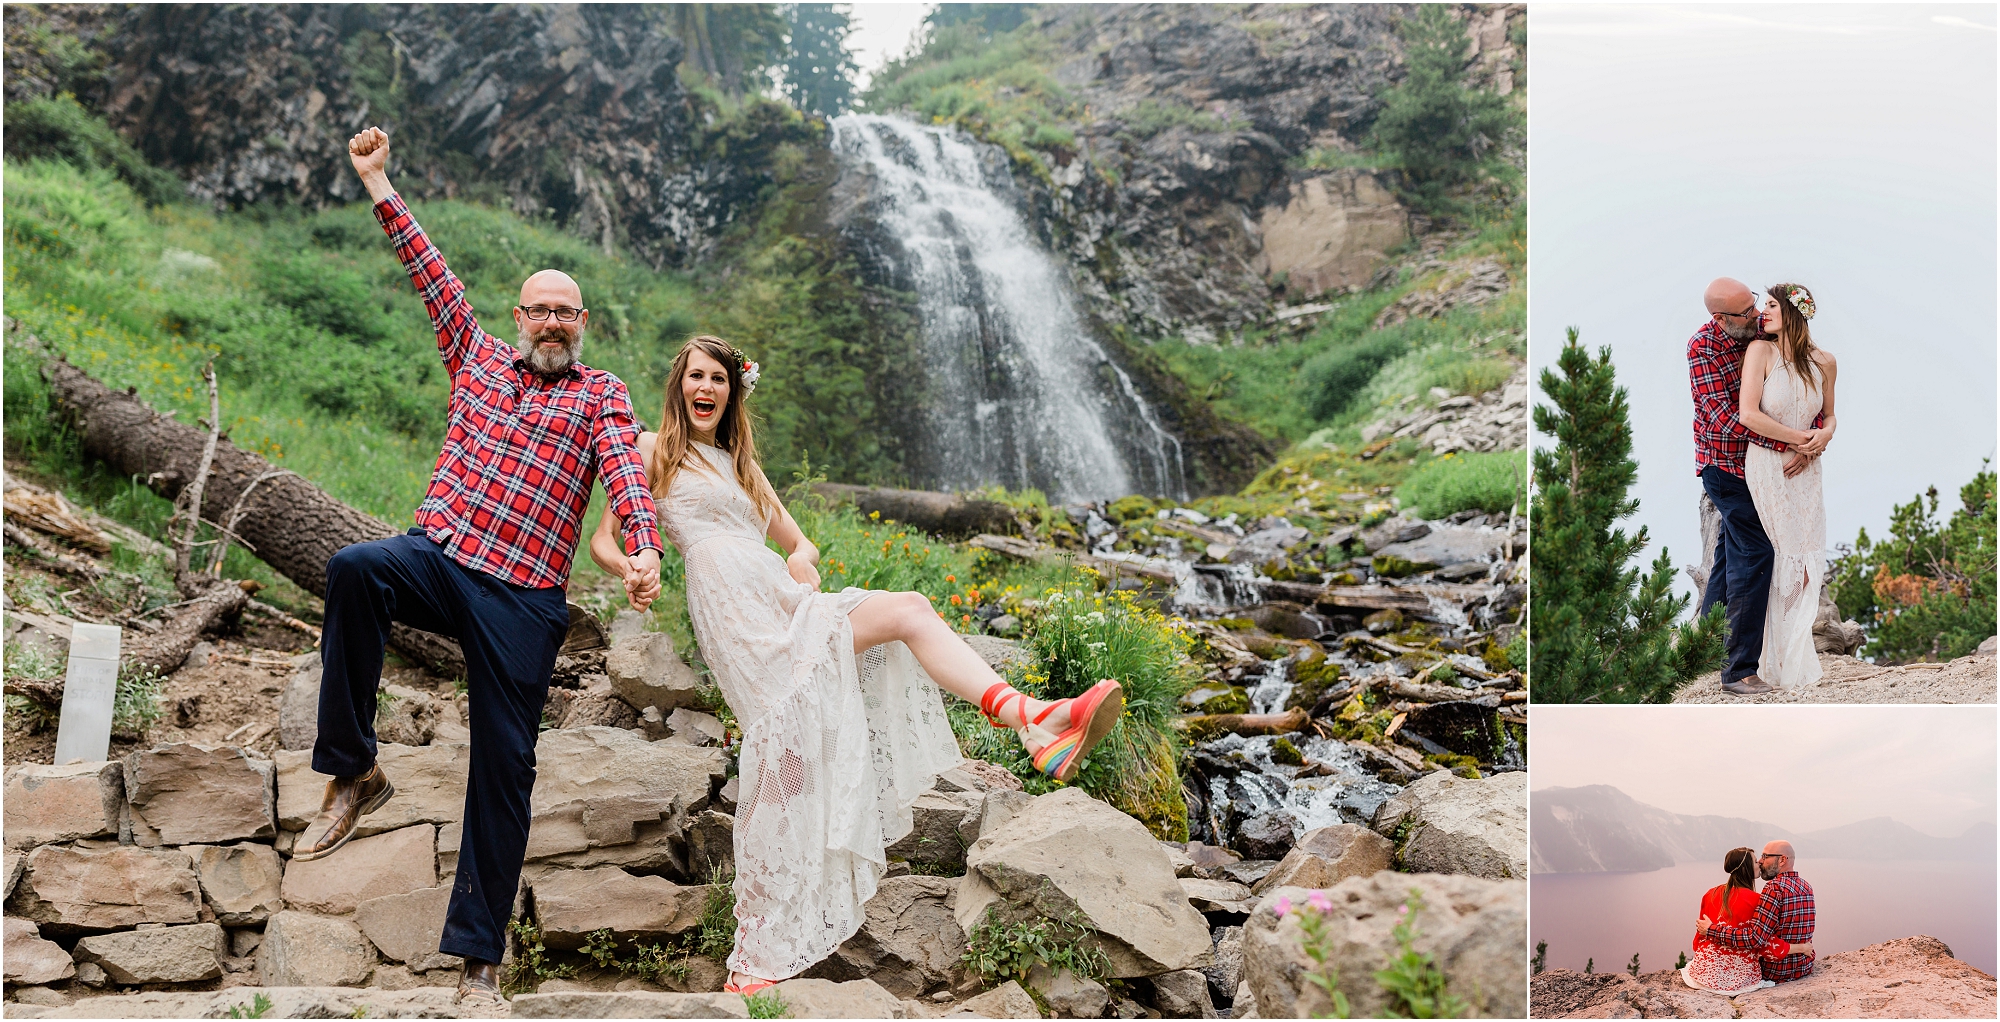 A couple celebrates their elopement at Crater Lake National Park near Bend, Oregon. | Erica Swantek Photography